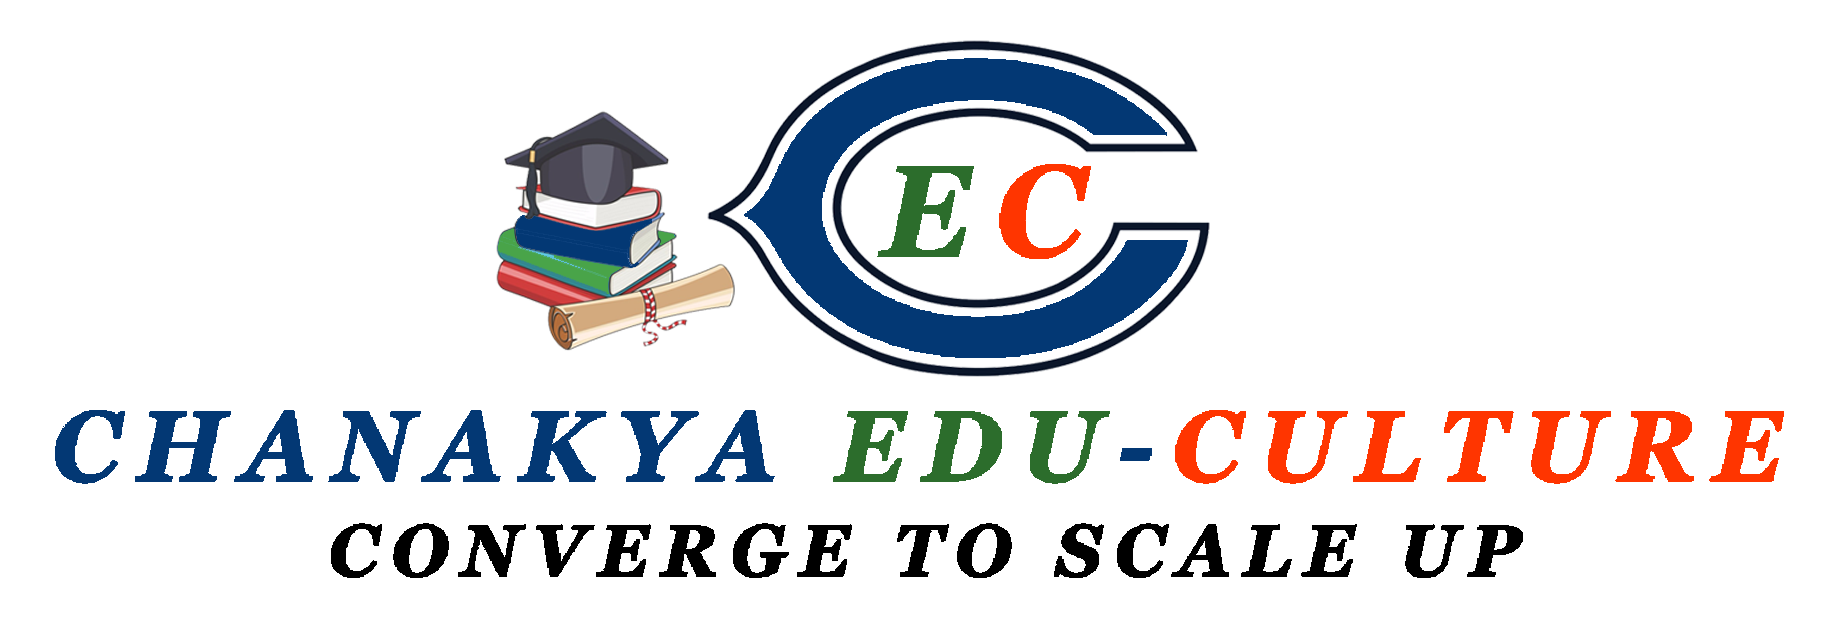 Chanakya University Bengalore | UG and PG Courses with Placements